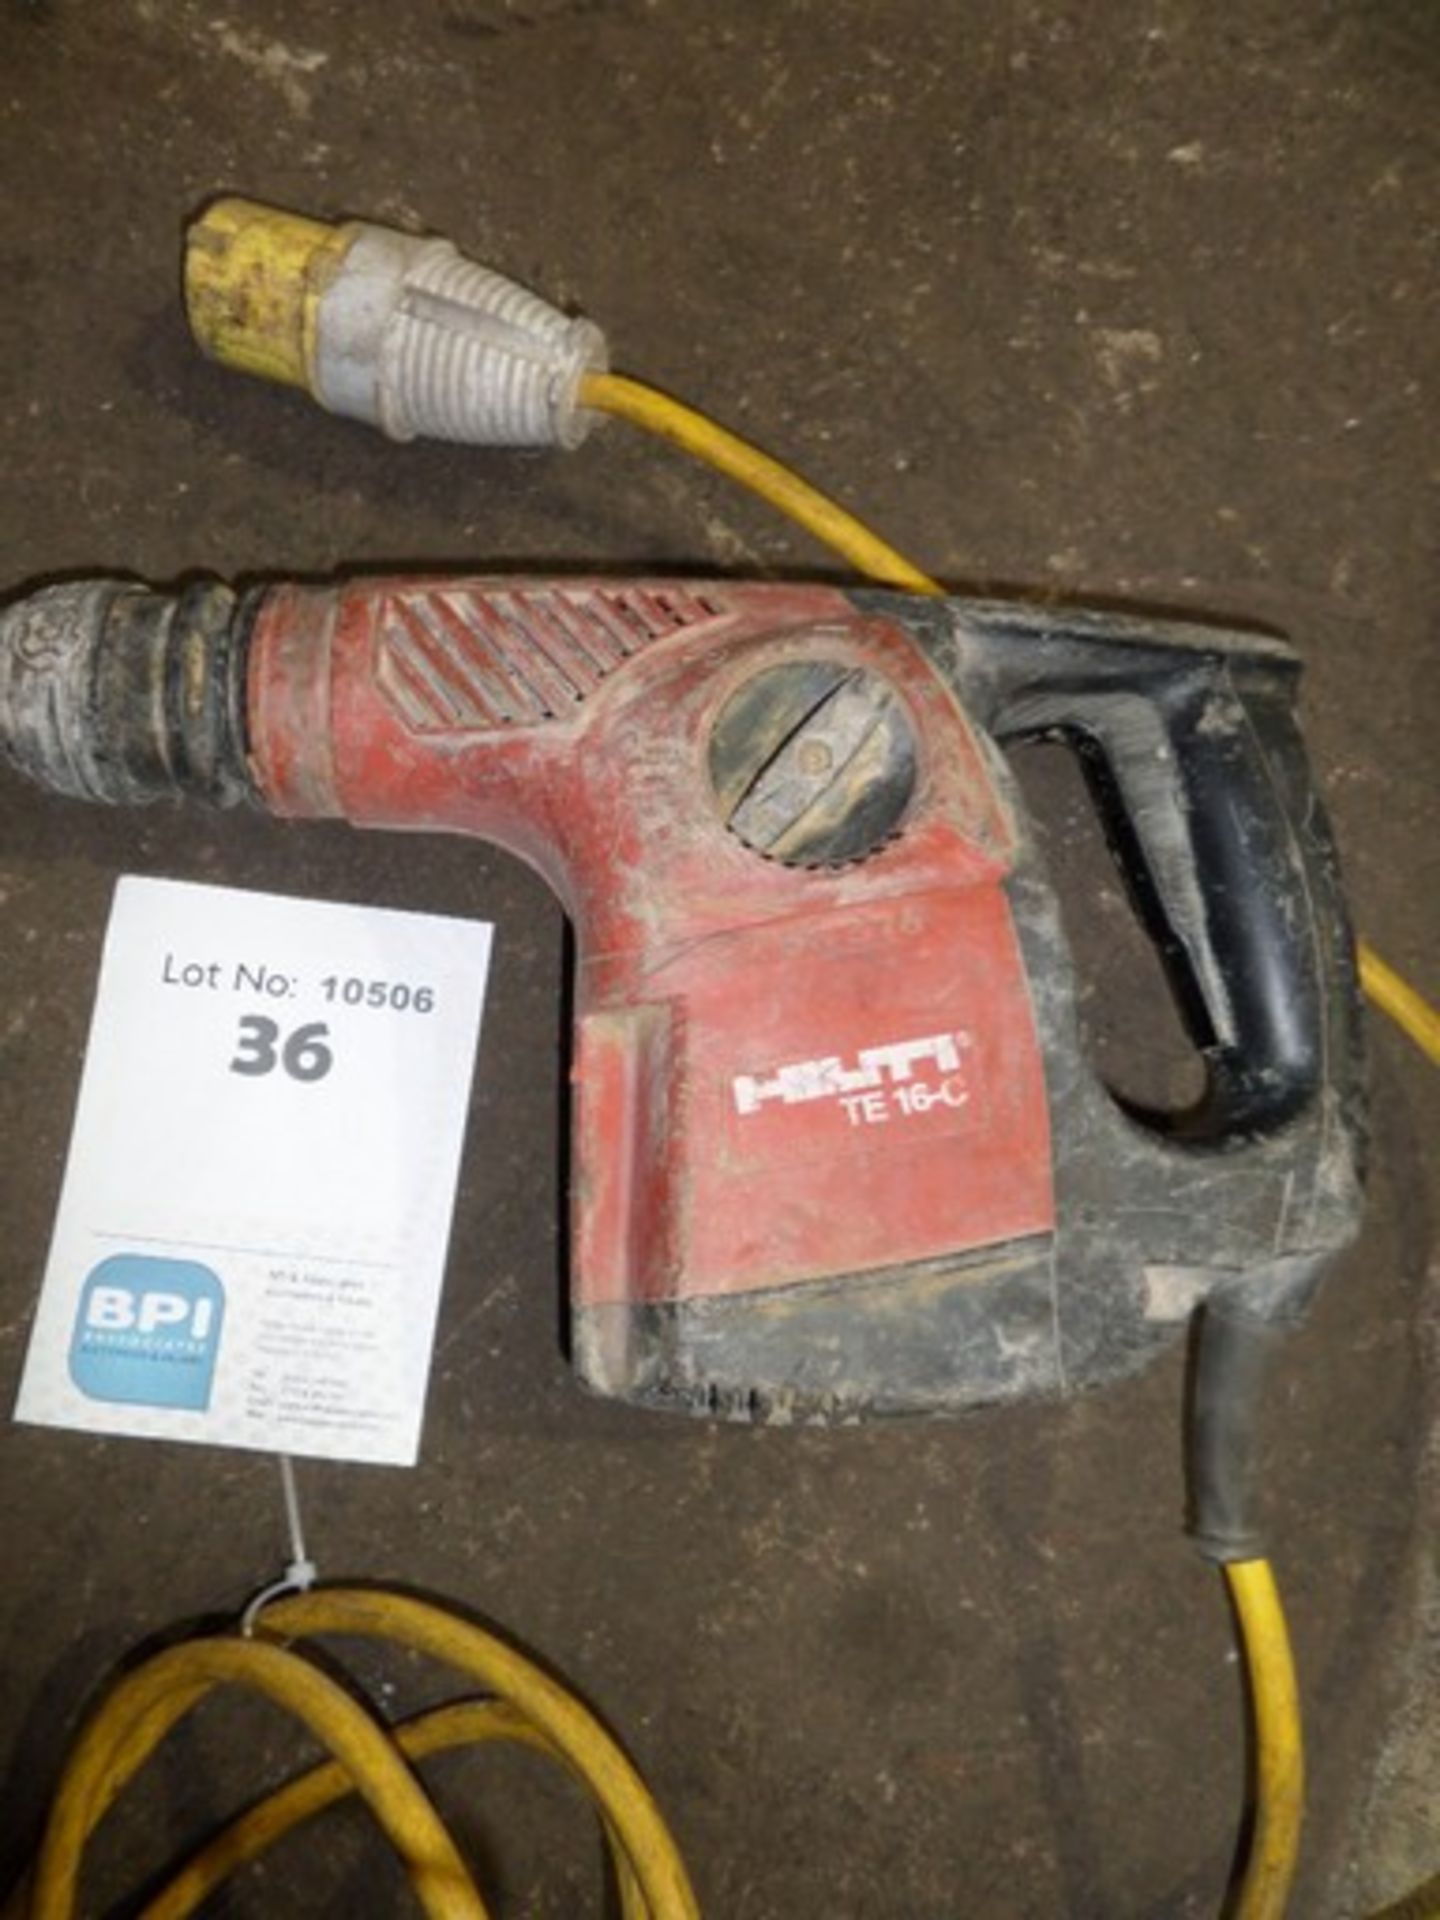 Hilti TE16-C {015183} HAMMER/DRILLER TE30C - 110V 110v 16amp connection and appears to be working